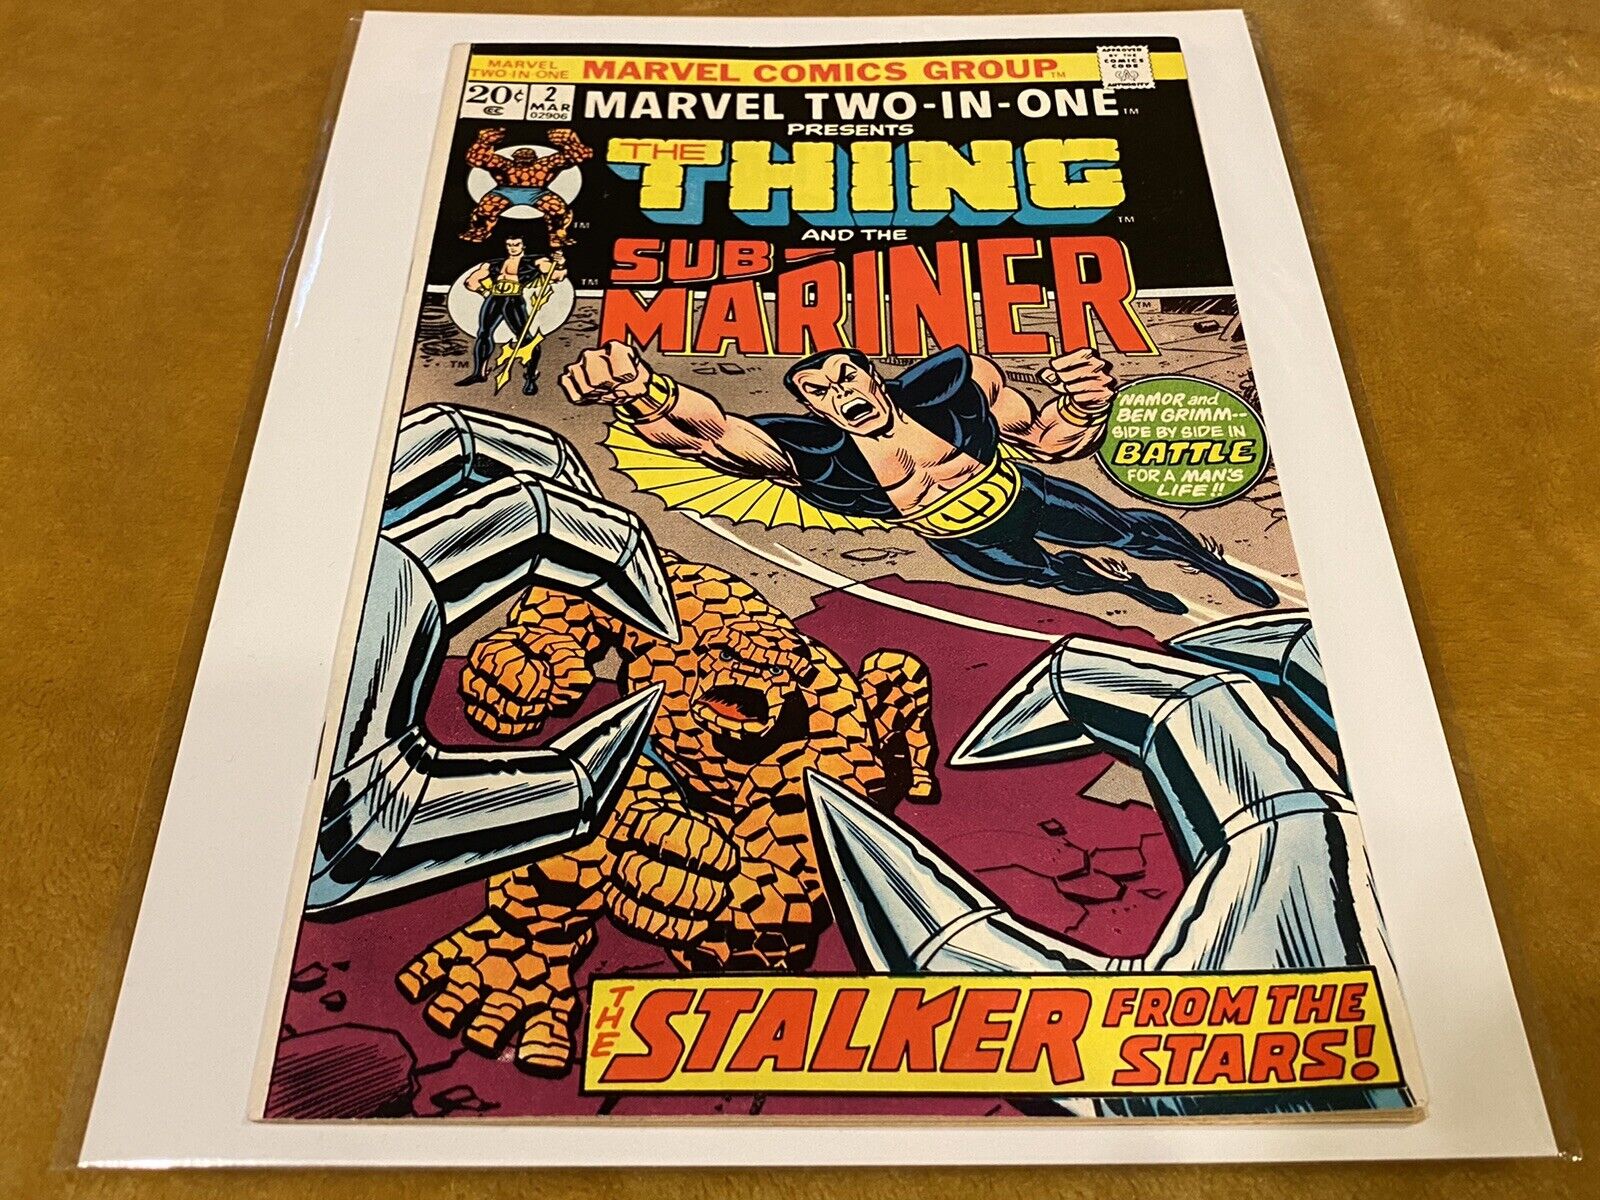 1973 Marvel Two in One #2 The Thing & Namor The Sub-Mariner Cover Iconic Comic!